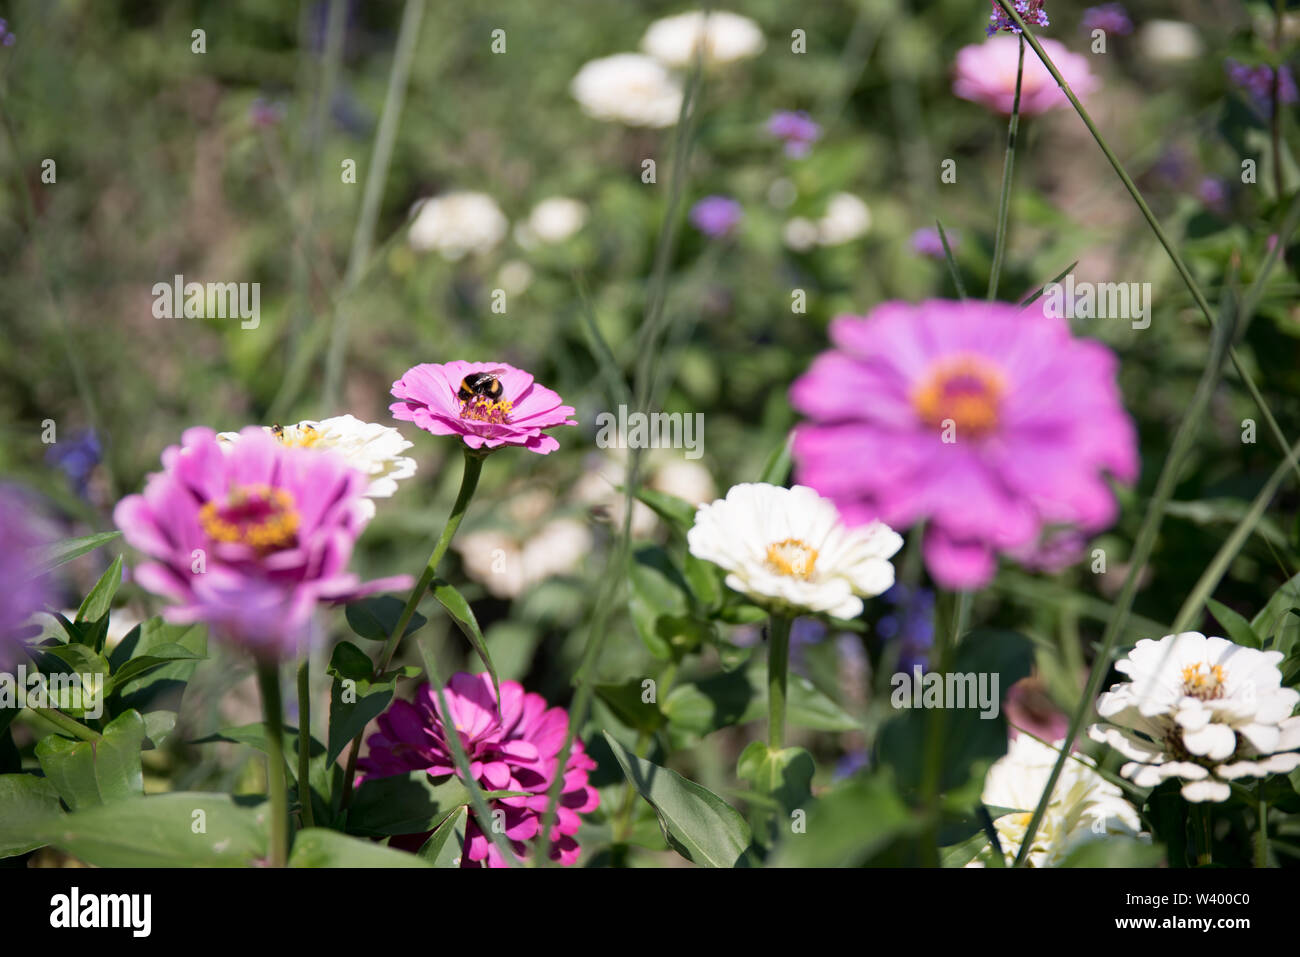 Bees and butterflies on wildflowers in a garden Stock Photo